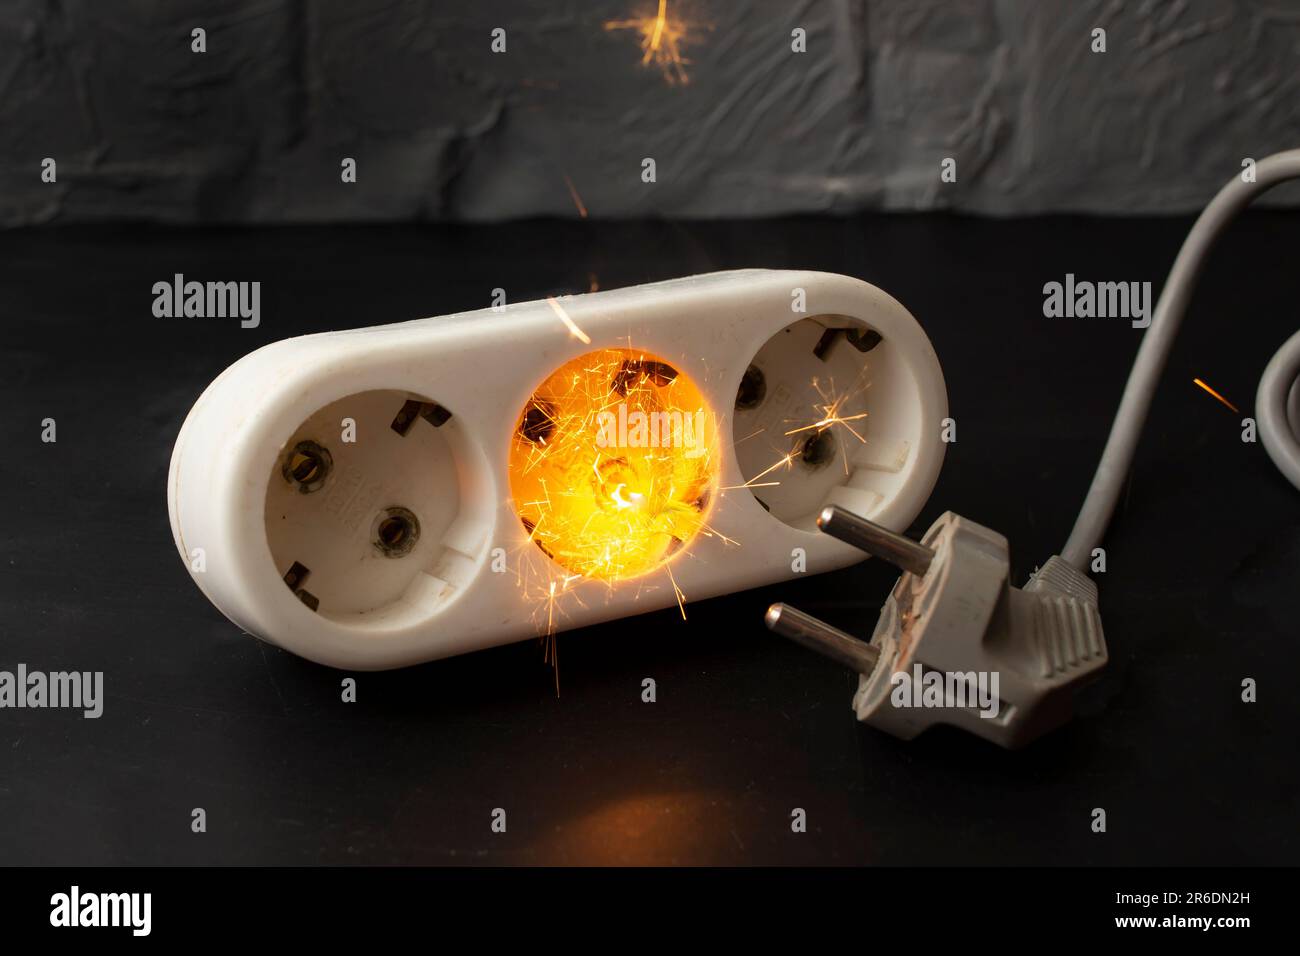 Short circuit sparks and flame in a outlet with an electrical cord on dark background Stock Photo